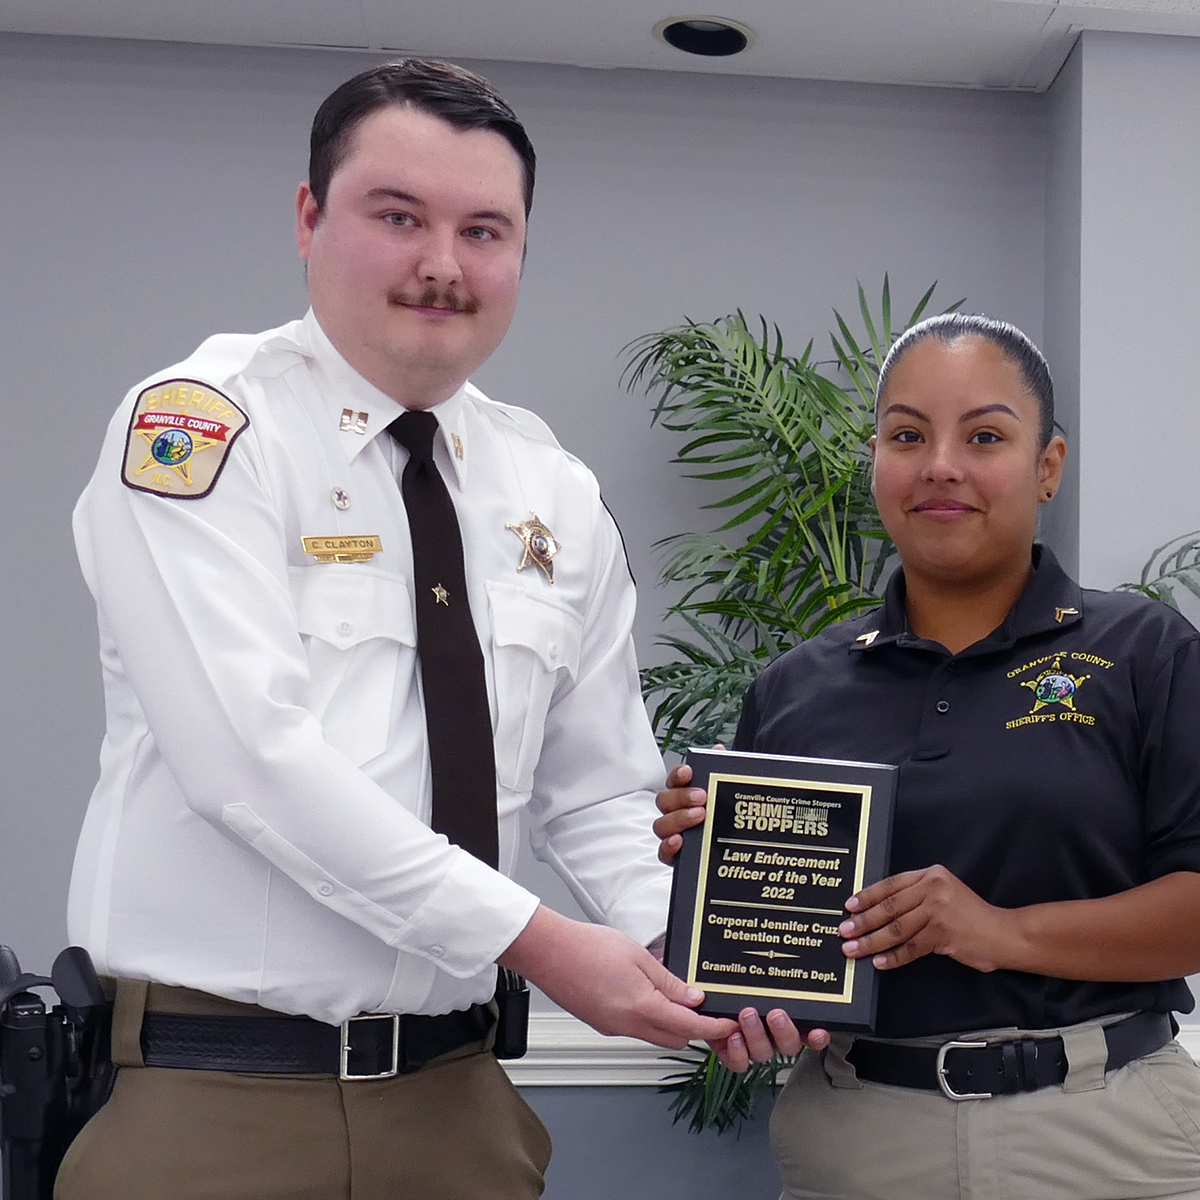 Law enforcement officer of the Year-Granville County Sheriff